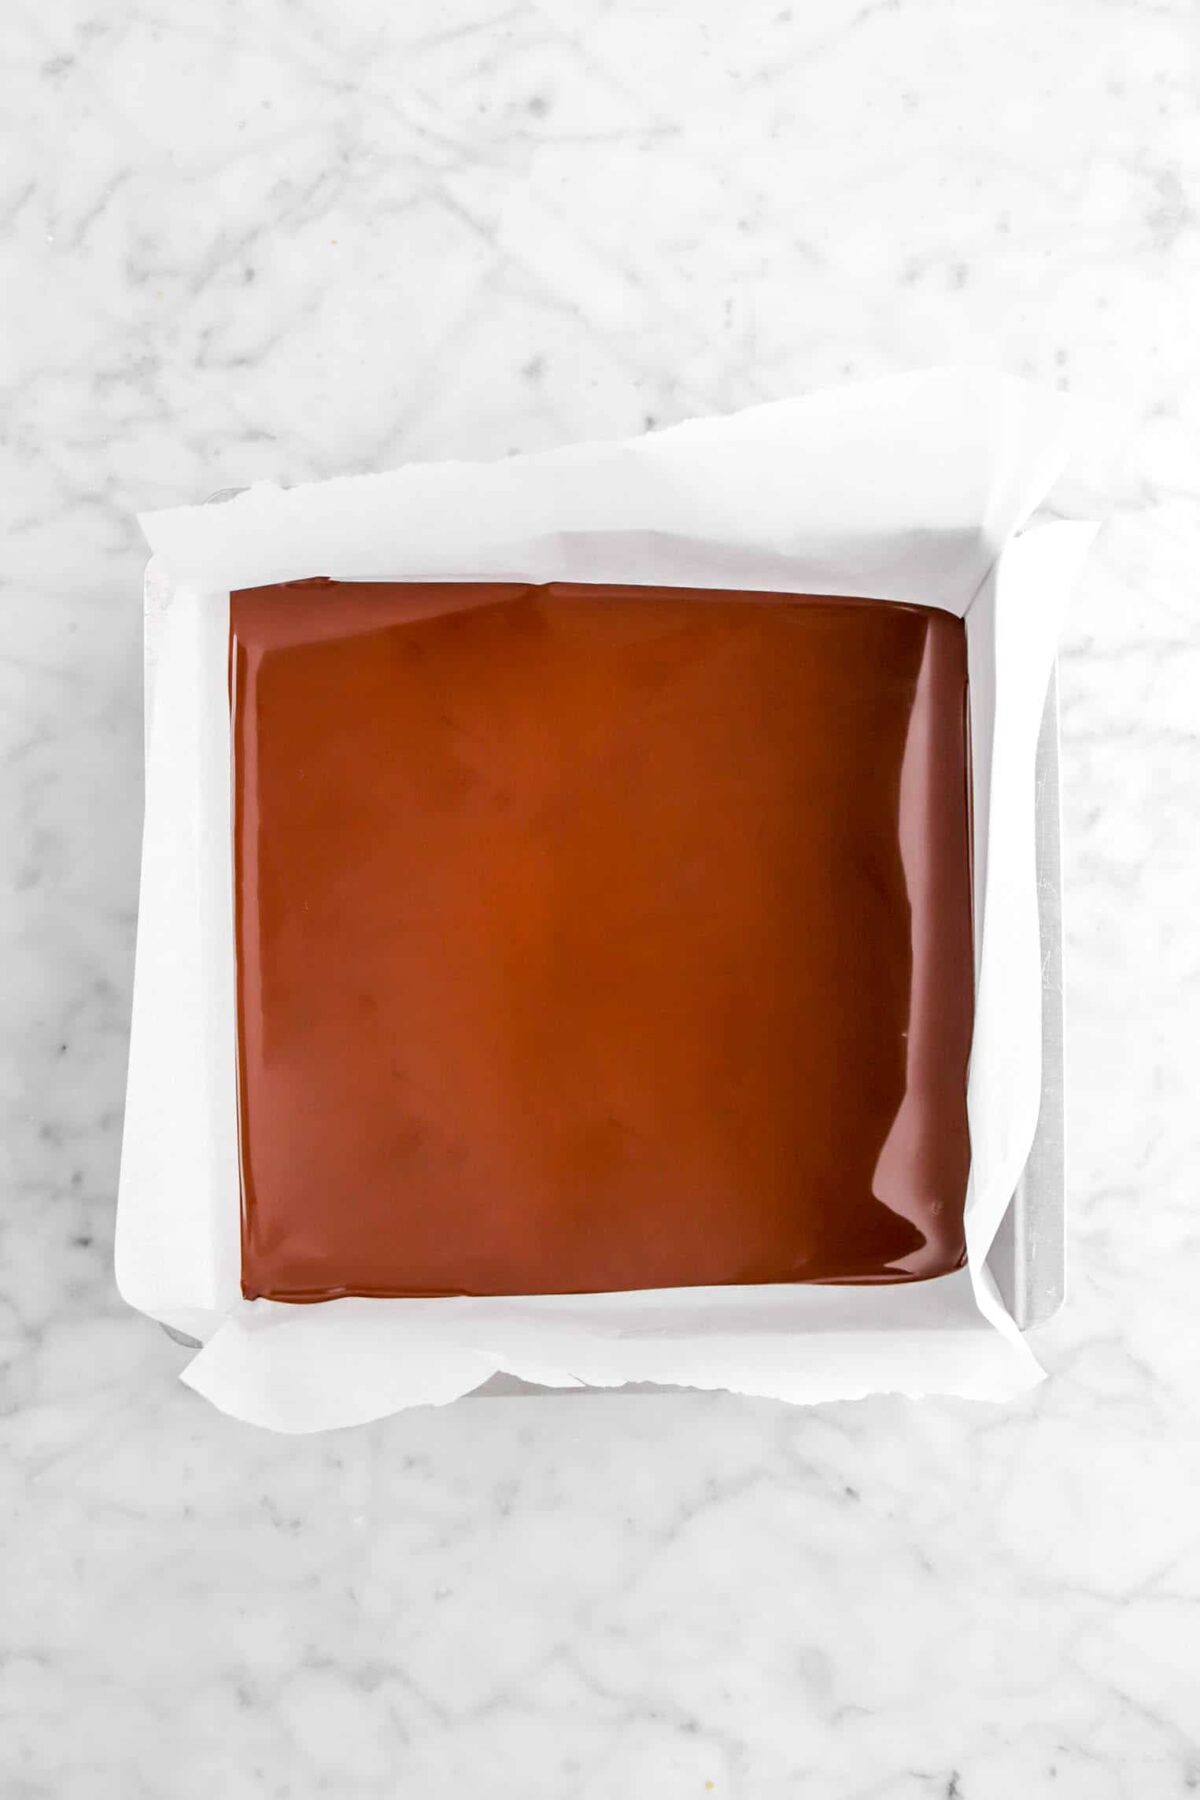 melted chocolate in lined square cake pan